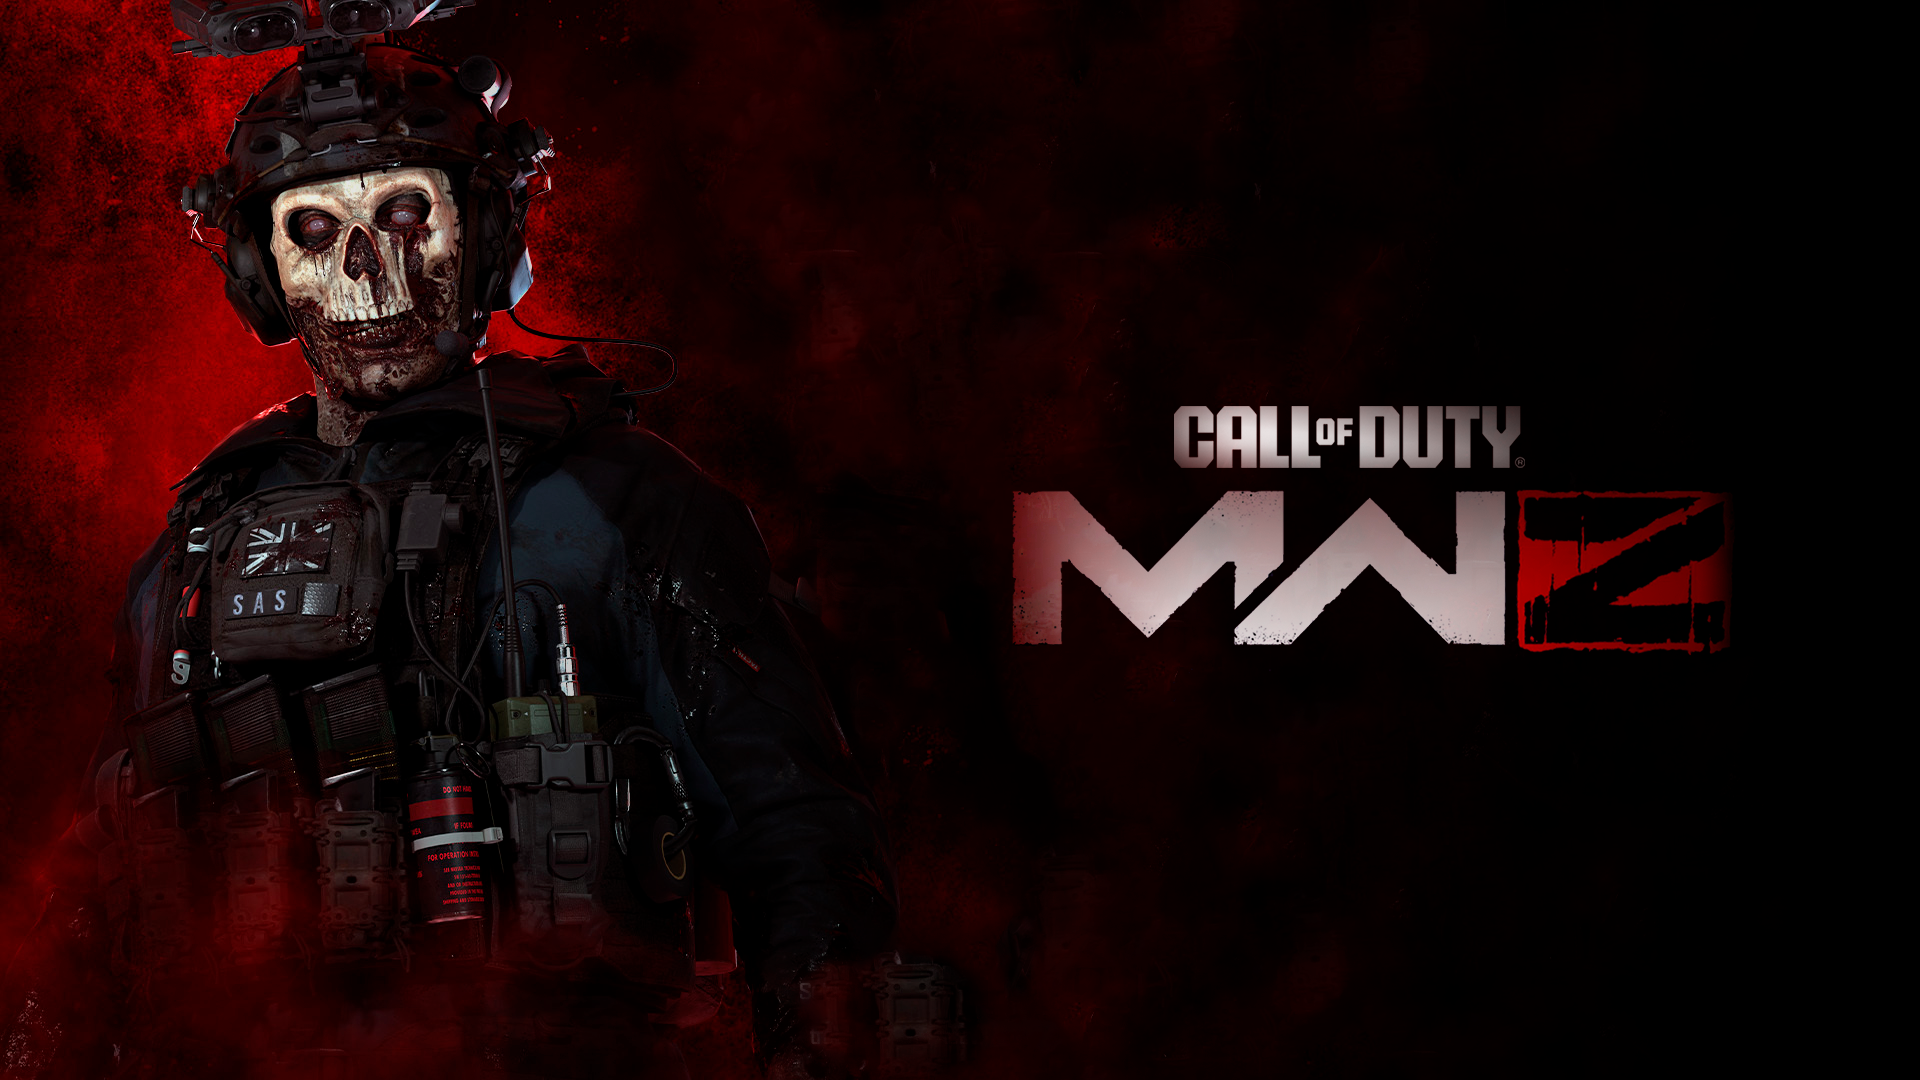 General 1920x1080 Call of Duty: Modern Warfare III Simon "Ghost" Riley call of duty: Black Ops Cold War Zombies Blizzard Entertainment call of duty warzone video games Activision Call of Duty zombies PC gaming cod mw